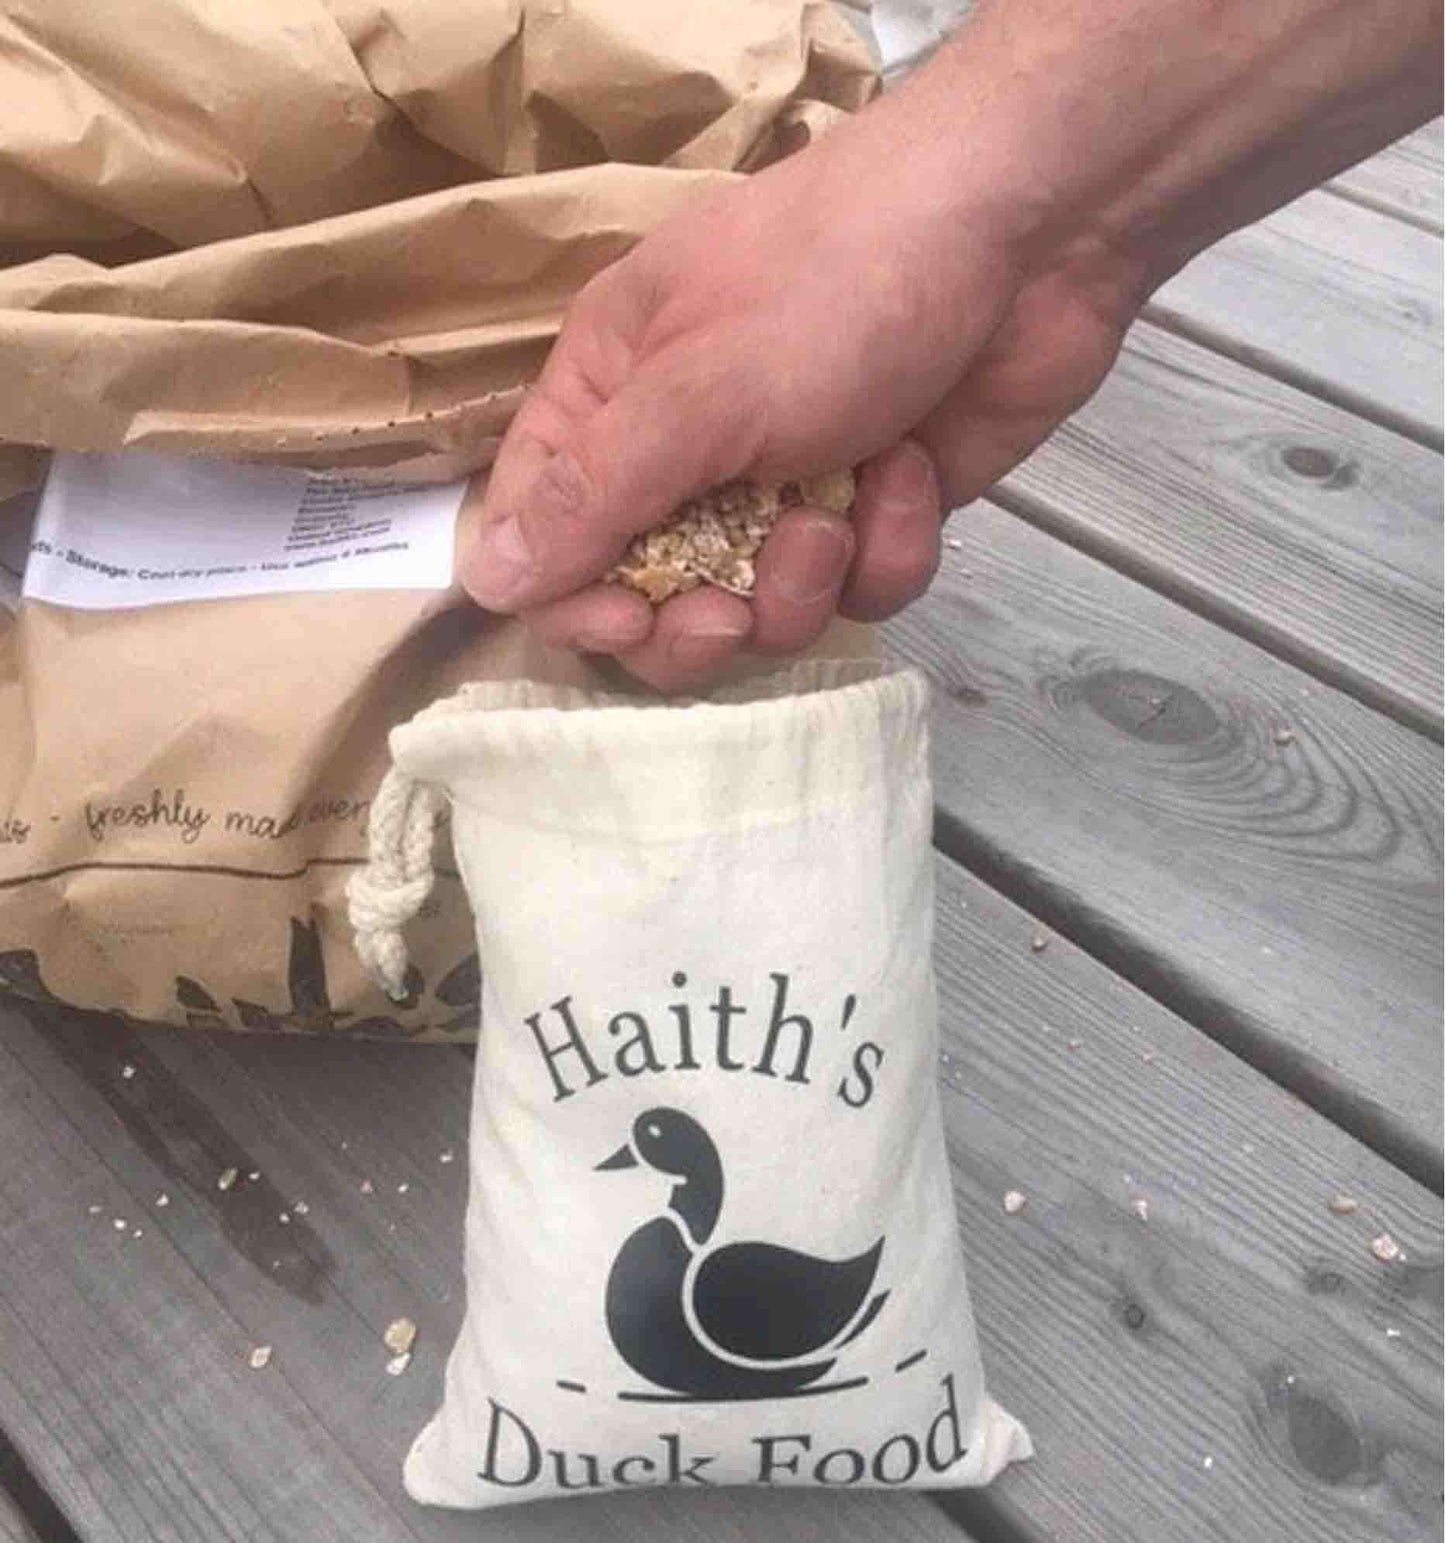 Duck and Goose Mix being taken out of Haith's Duck Food Pouch - a cotton bag with a duck printed on it. 